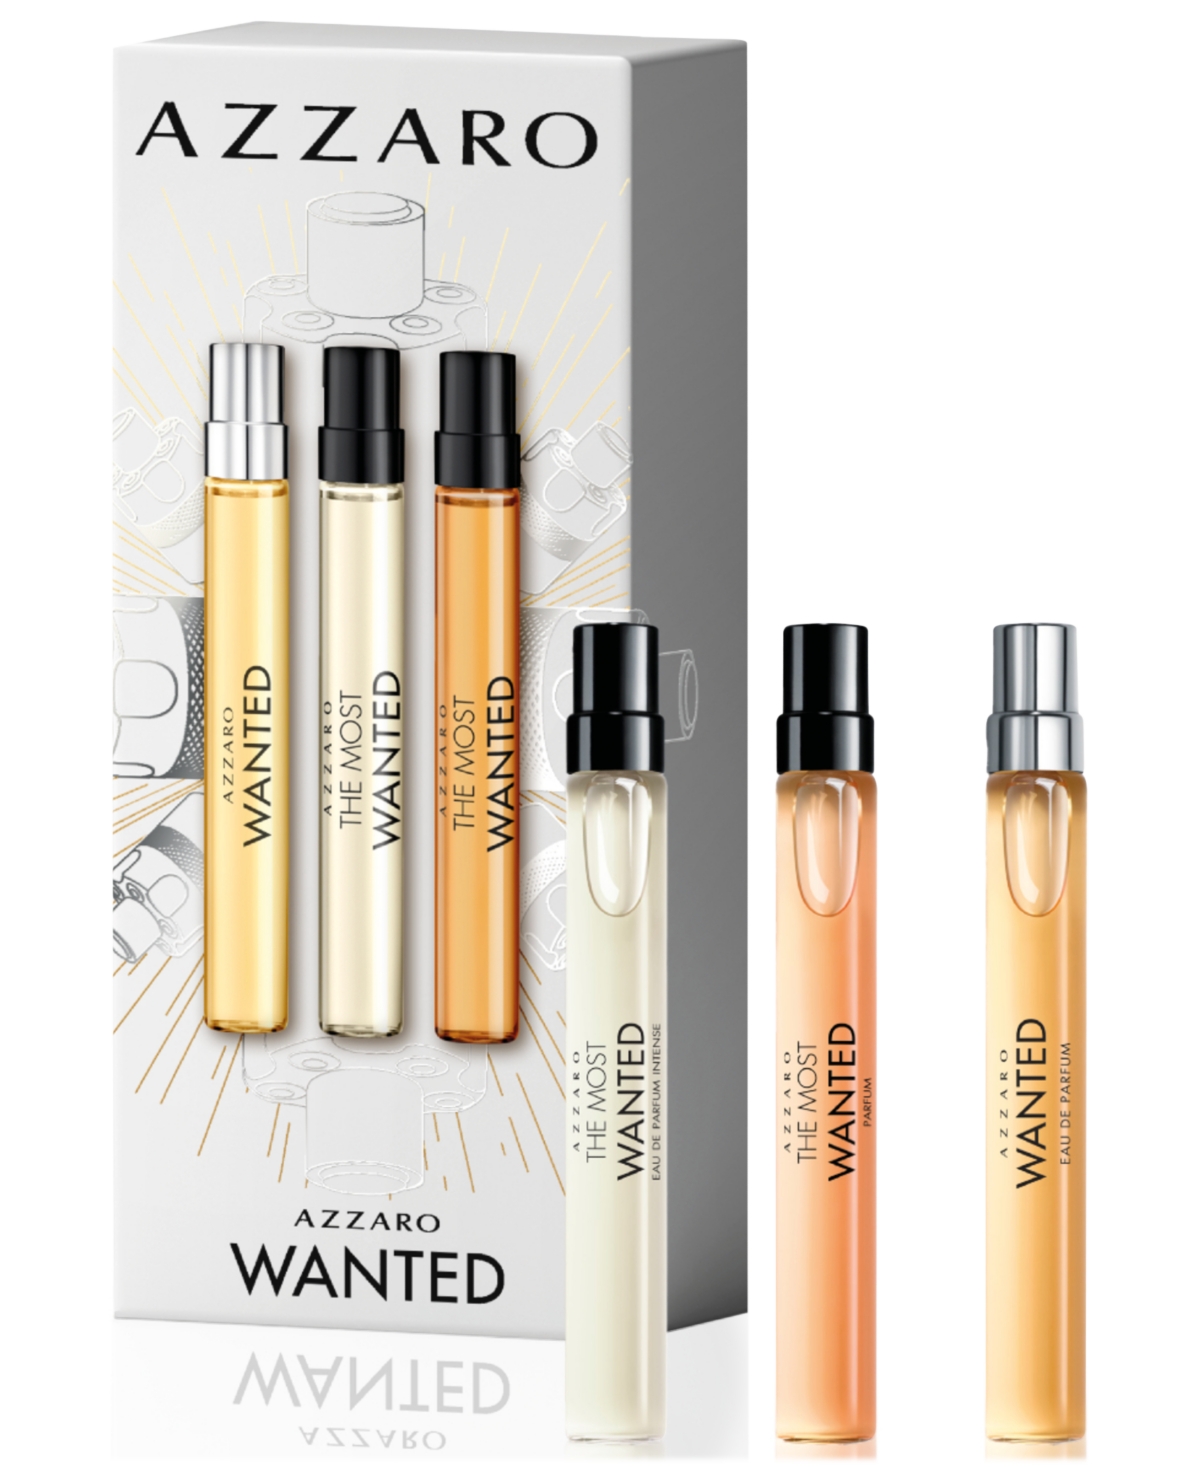 Azzaro Men's 3-pc. The Most Wanted Cologne Discovery Set In White